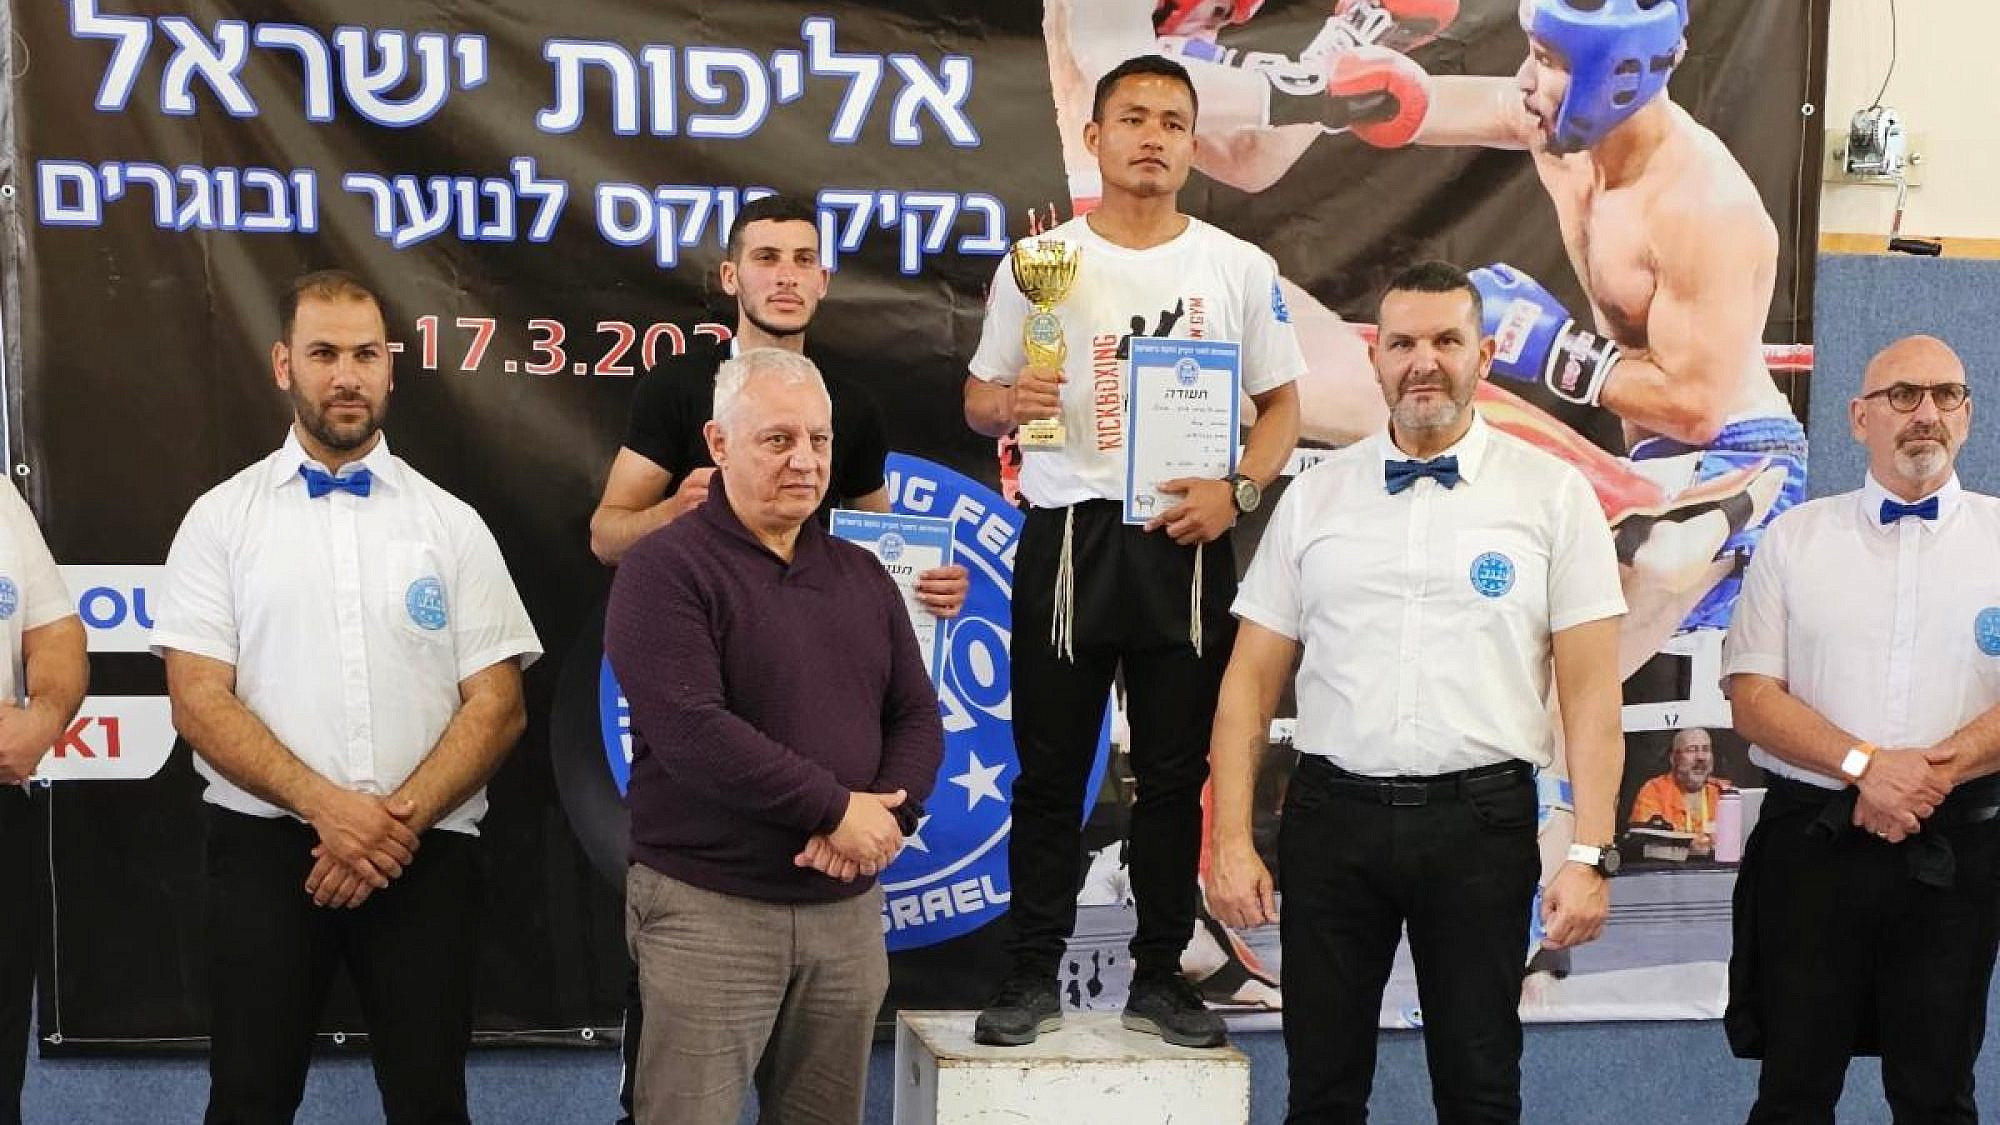 Obed Hrangchal stands in the champion's spot at the national tournament in Kfar Yasif, the Western Galilee, March 17, 2023. Courtesy.